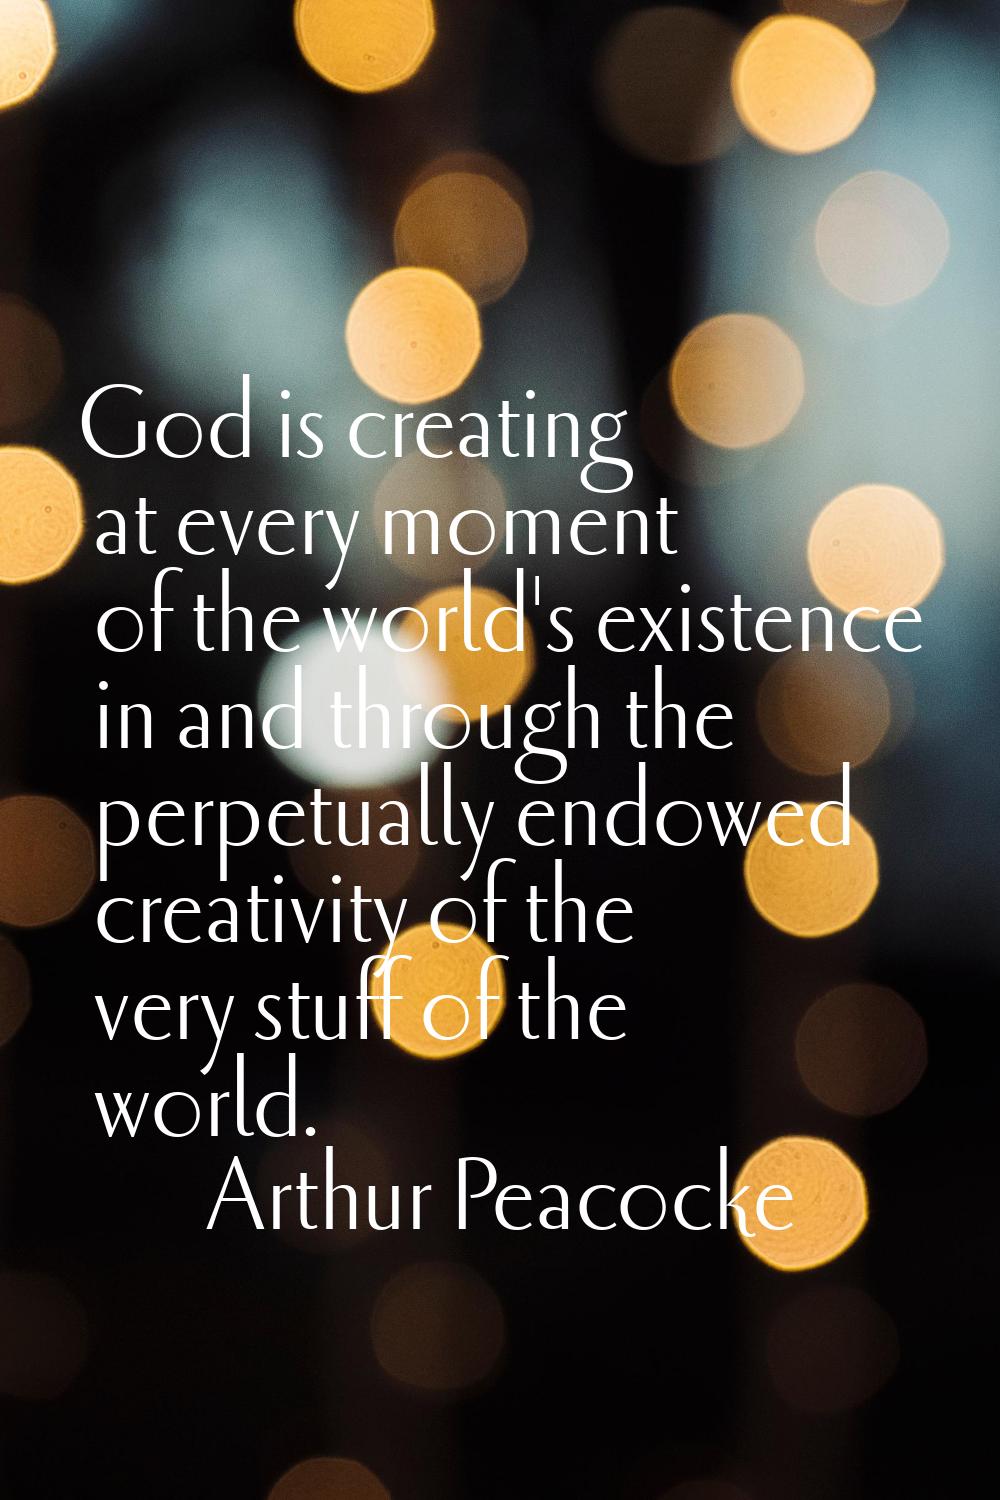 God is creating at every moment of the world's existence in and through the perpetually endowed cre